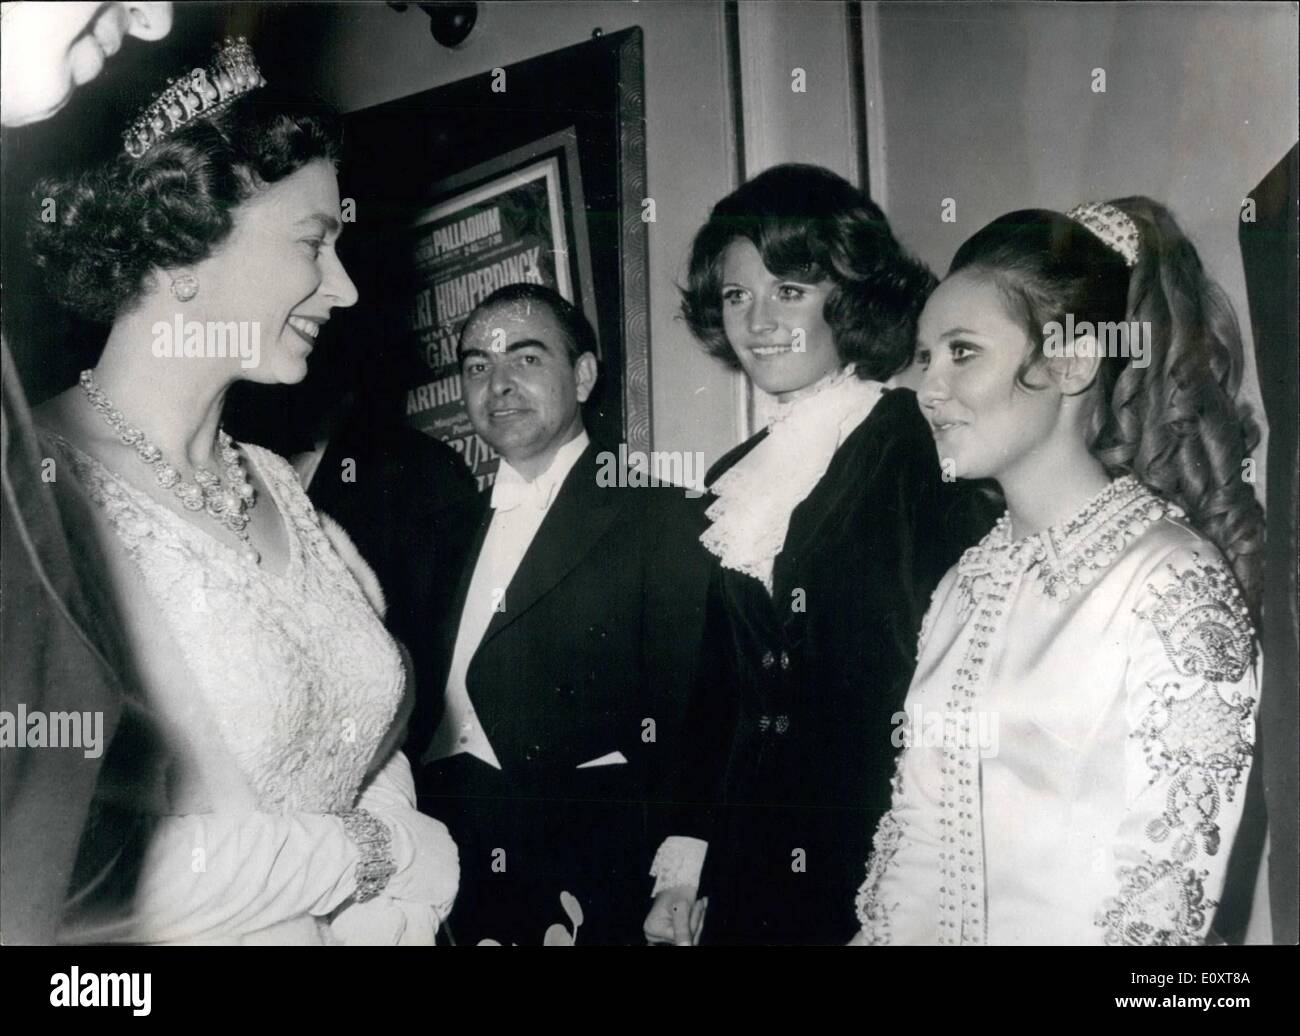 Nov. 11, 1967 - Royal Variety Performance: H.M. The Queen, accompanied by Prince last night attended the Royal Variety Performance, at the London Palladium.After the show, the performer were presented to her Majesty. Phot Shows The Queen talks to pop singers, Lulu (on right), ad Sandie Shaw, after last night's Royal Variety Performance. Stock Photo